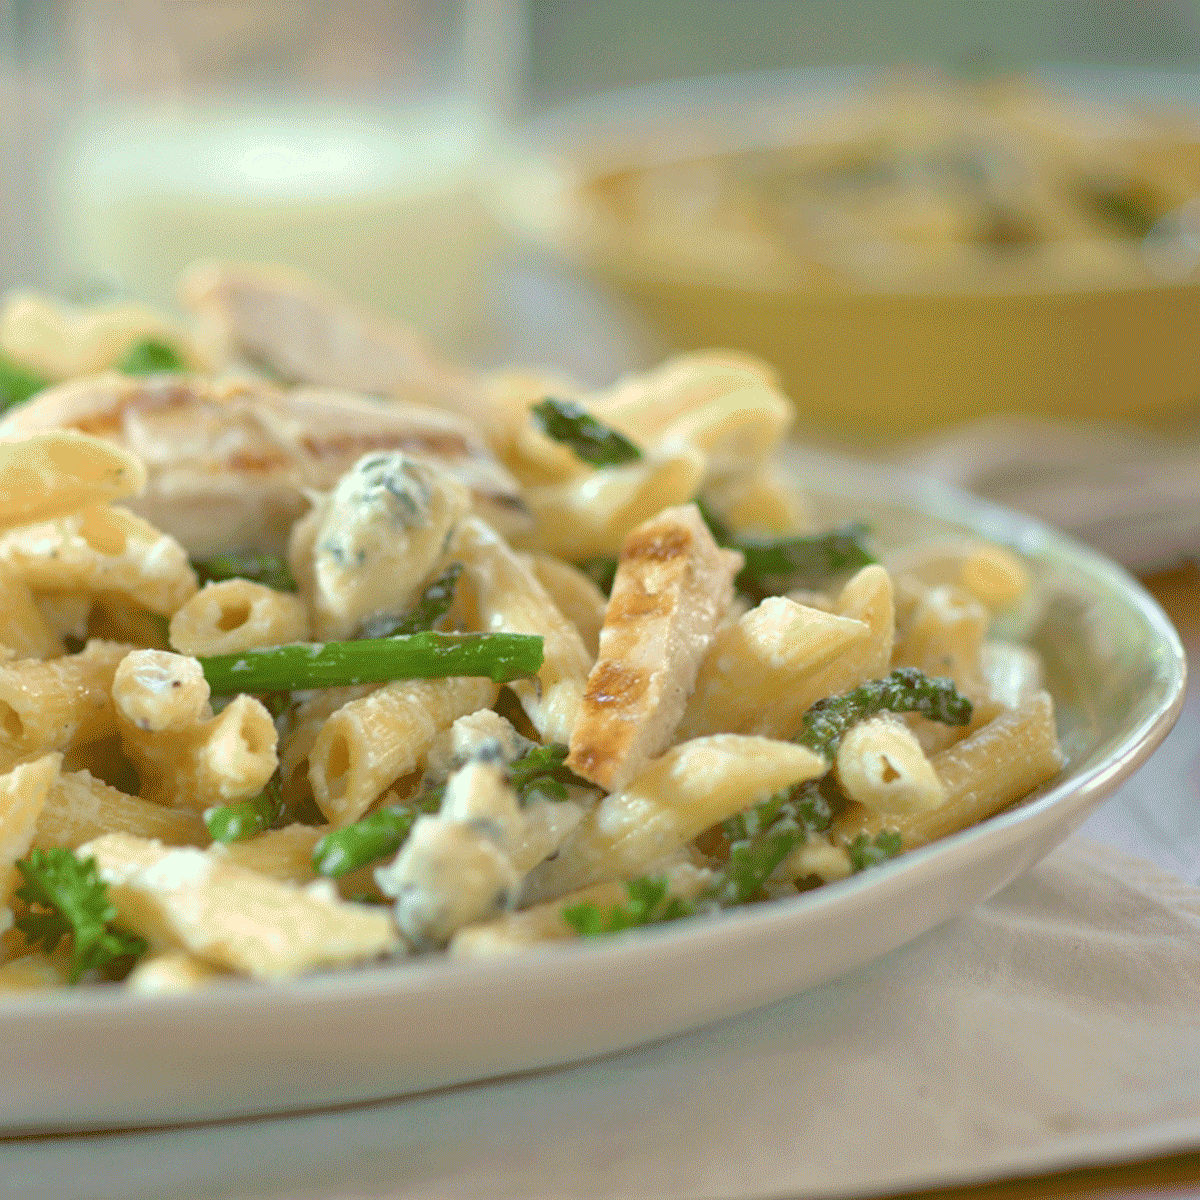 Chicken Asparagus and Penne Pasta with Ricotta Cream Sauce